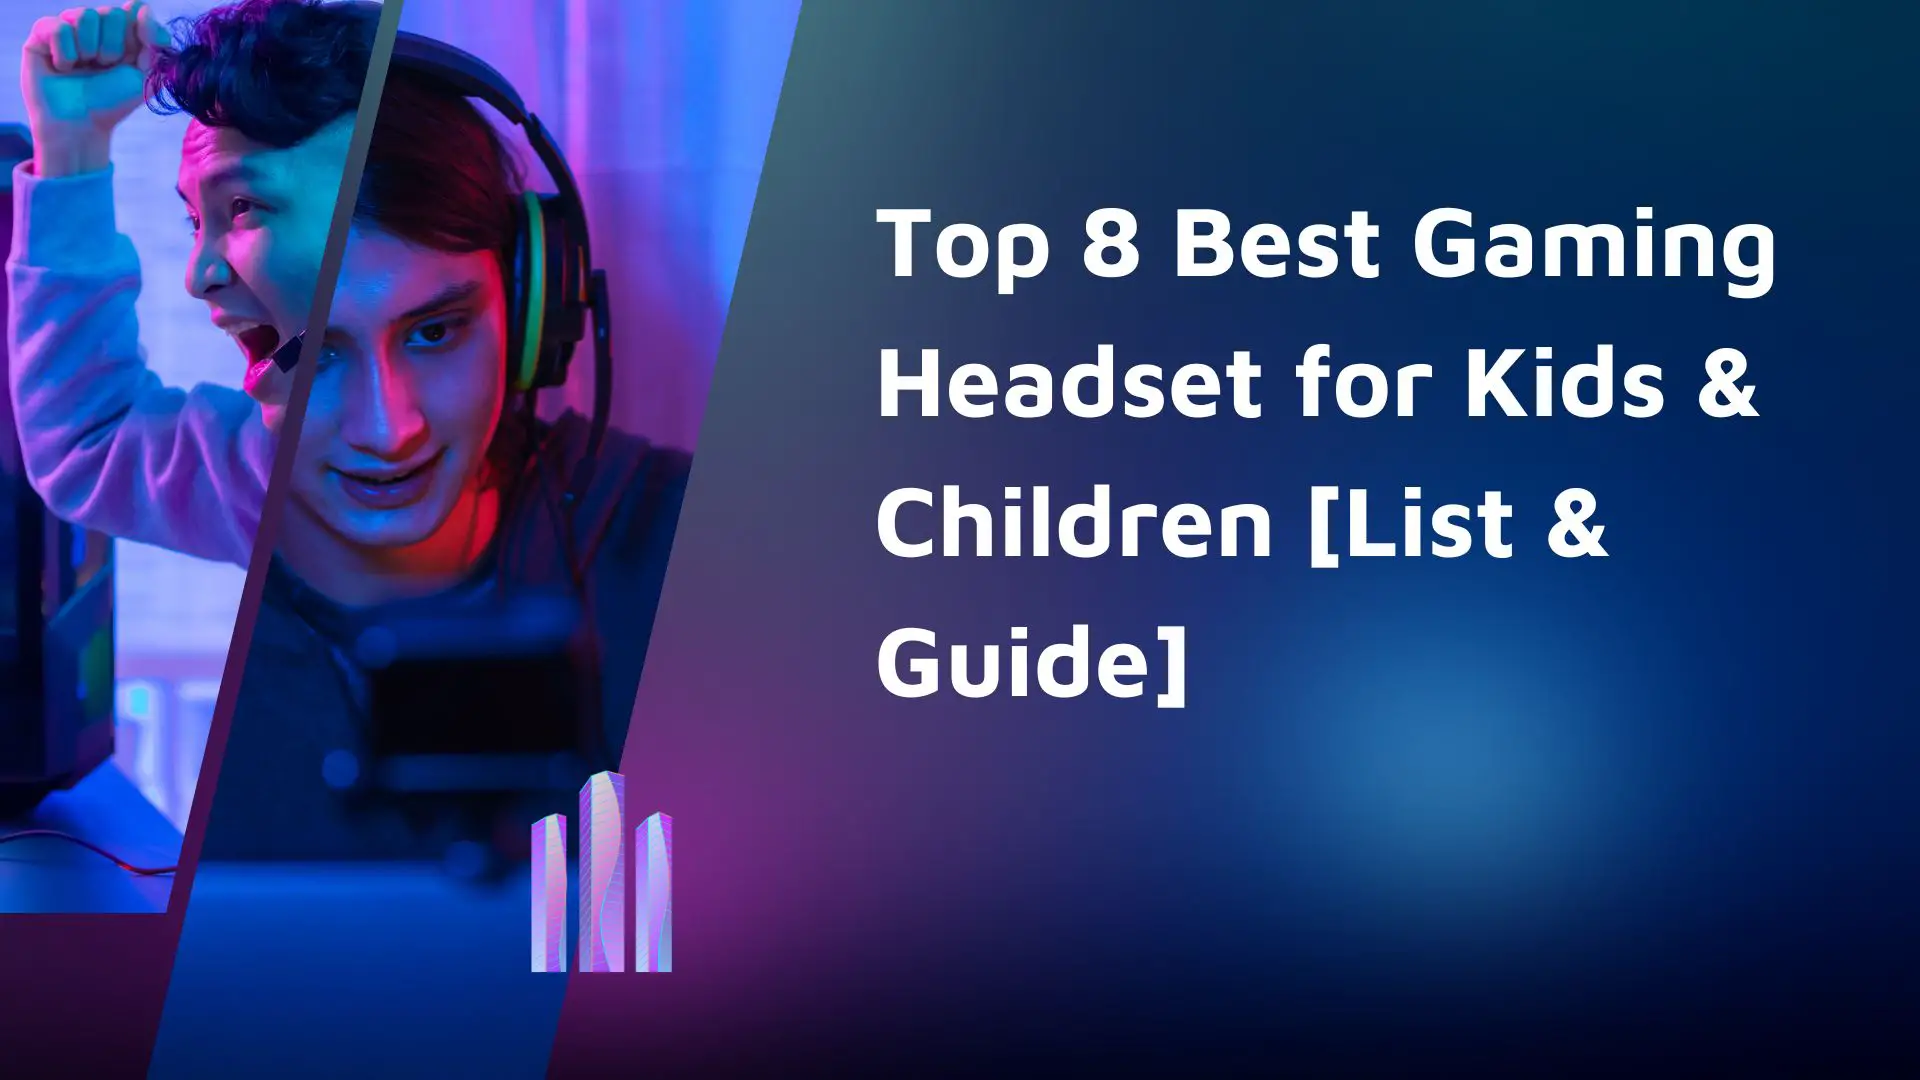 Top 8 Best Gaming Headset for Kids & Children [List & Guide]